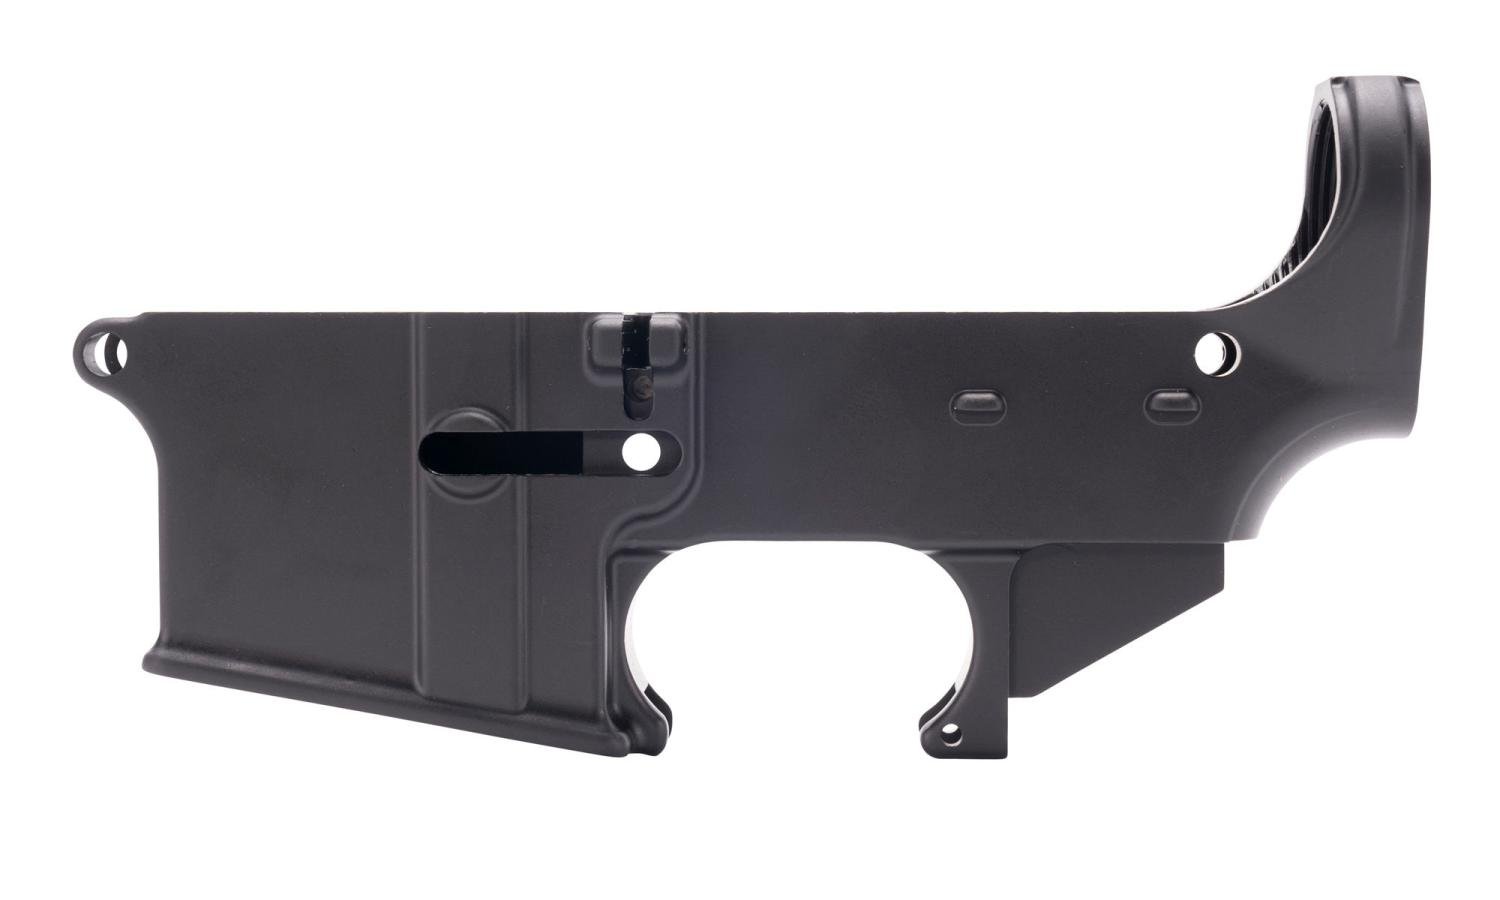 Anderson 80% Lower Anodized Black - $44.99